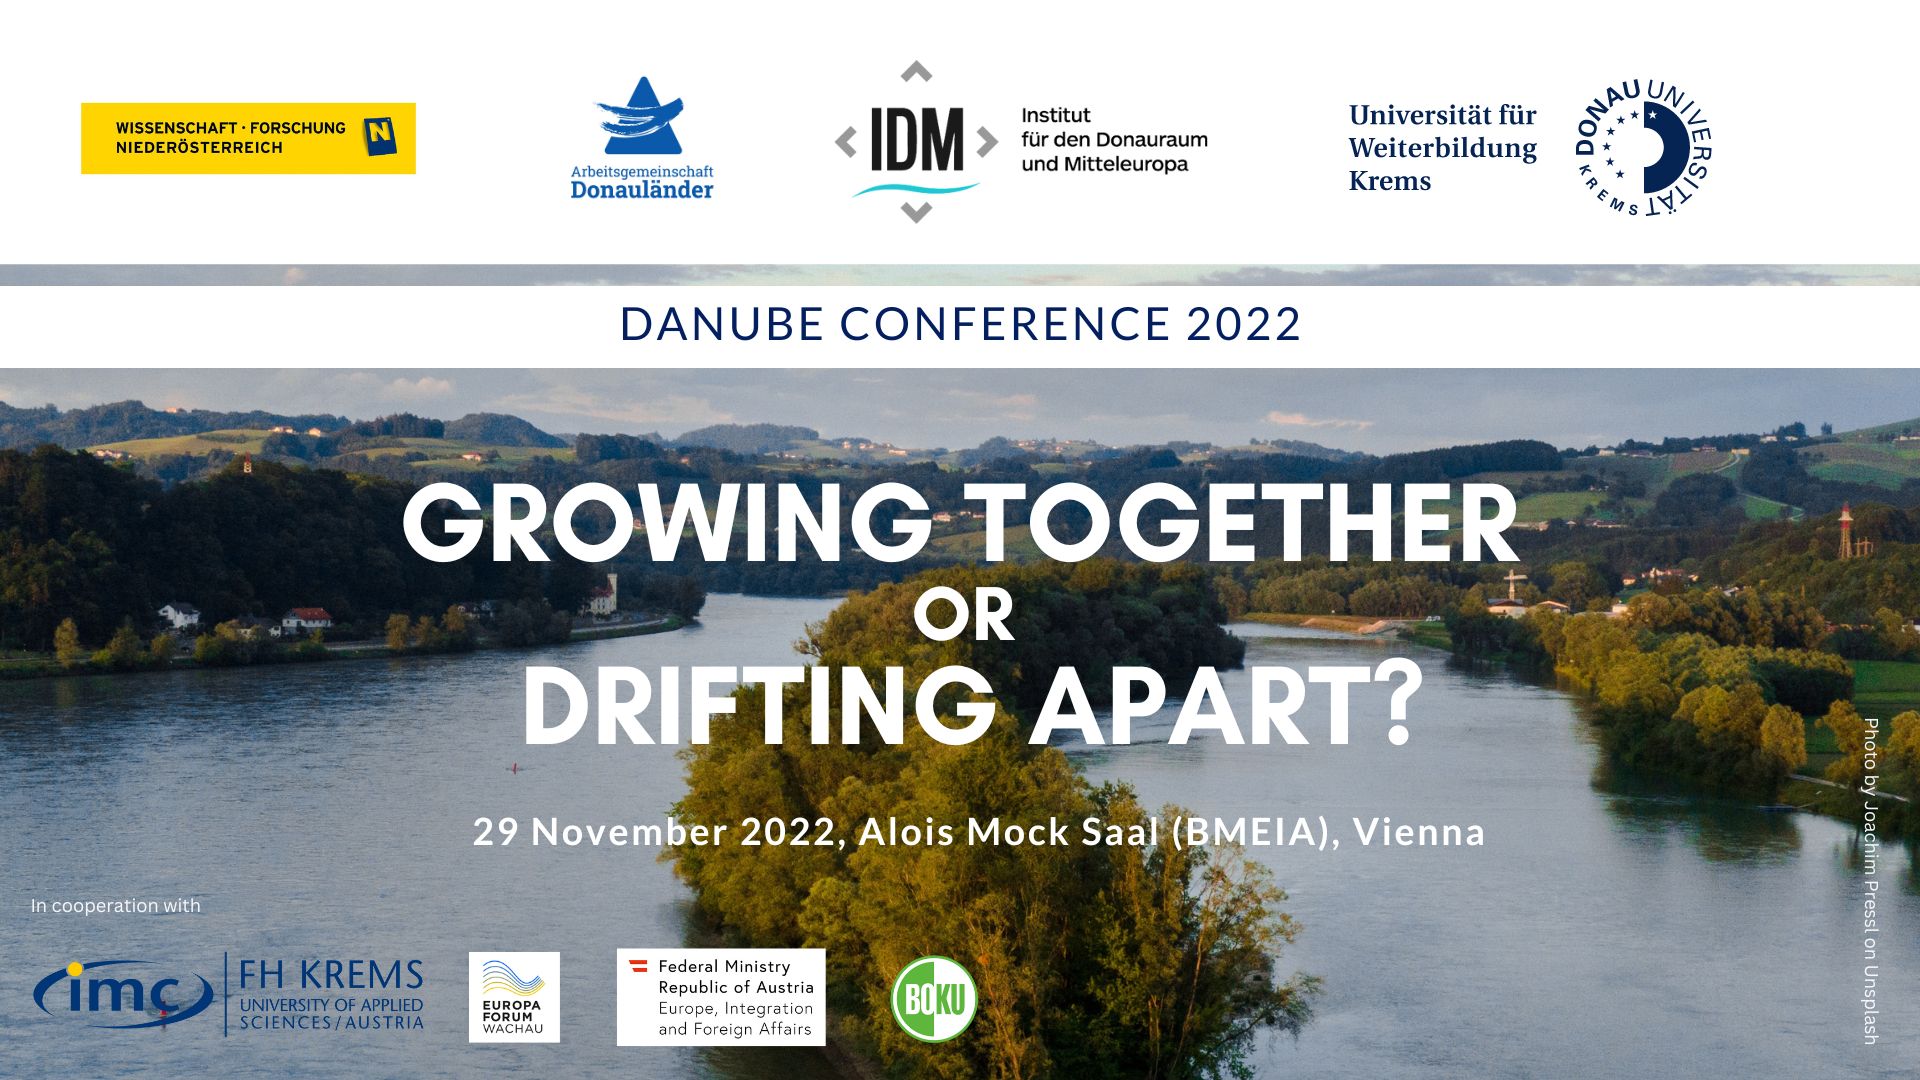 Danube Conference: Growing Together or Drifting Apart?